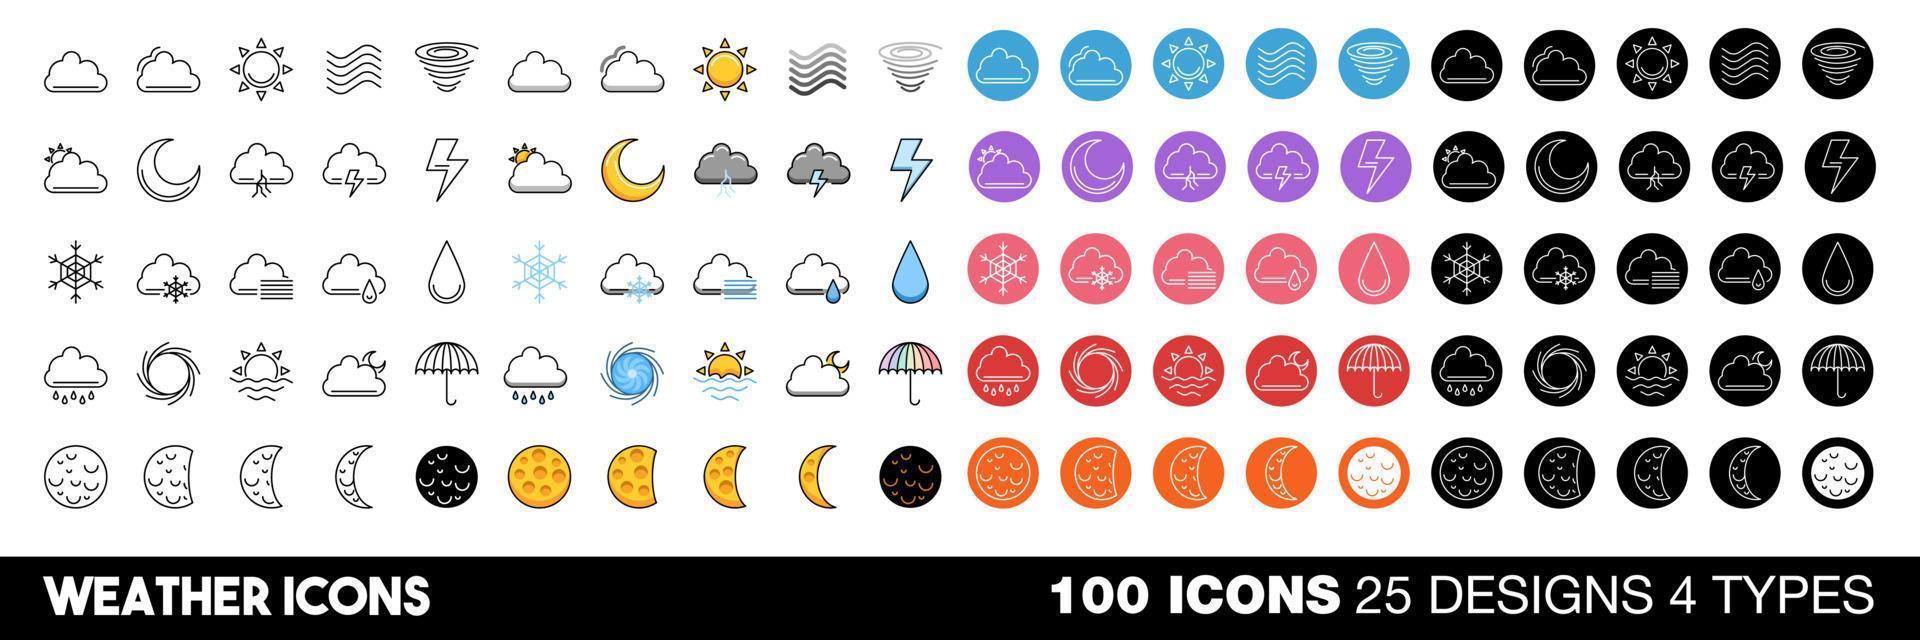 Weather icons vector set collection graphic design